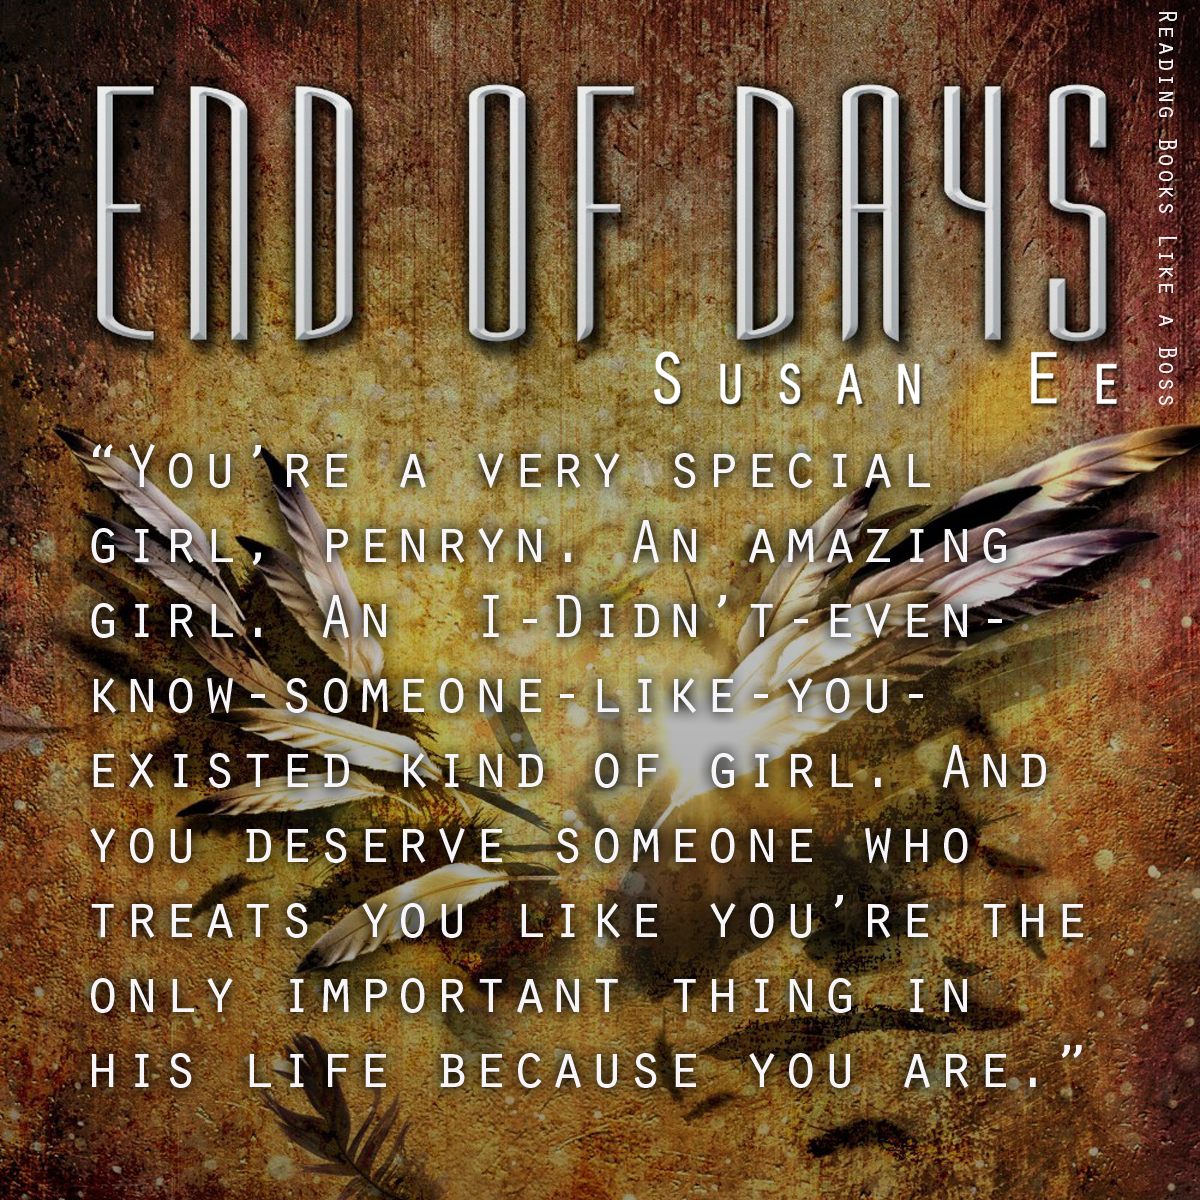 End of Days by Susan Ee